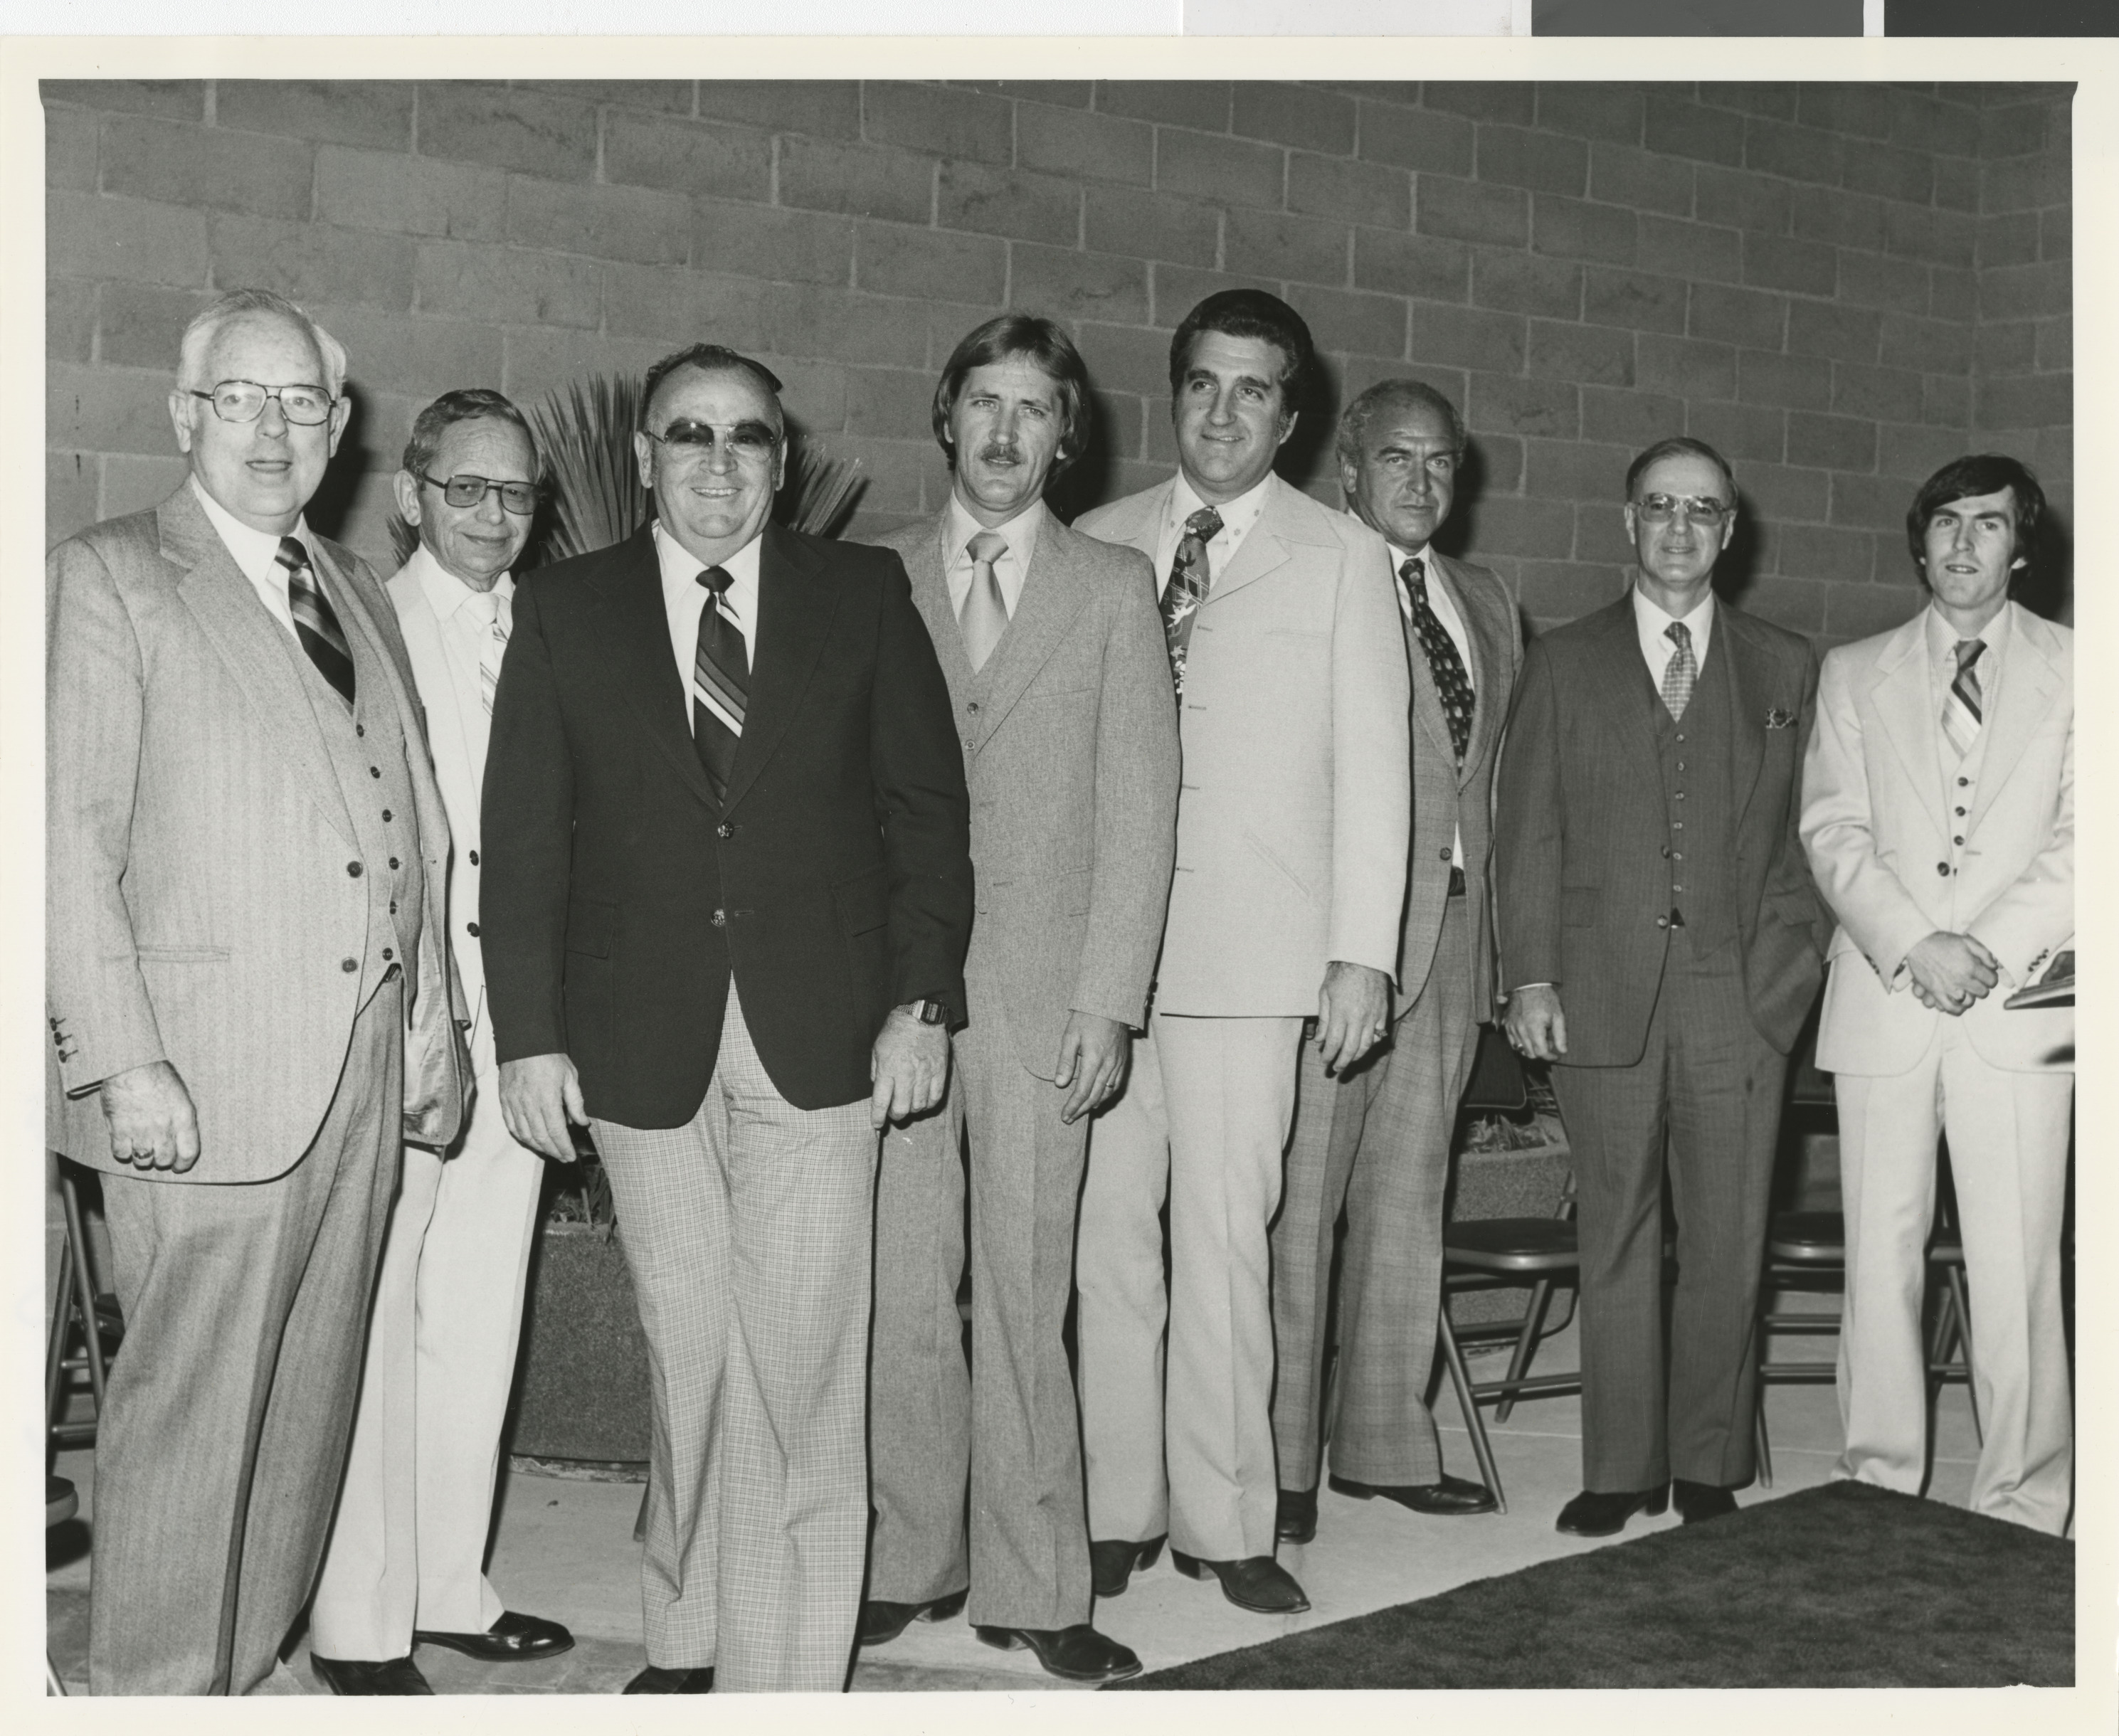 Photograph of Ron Lurie with a group of men